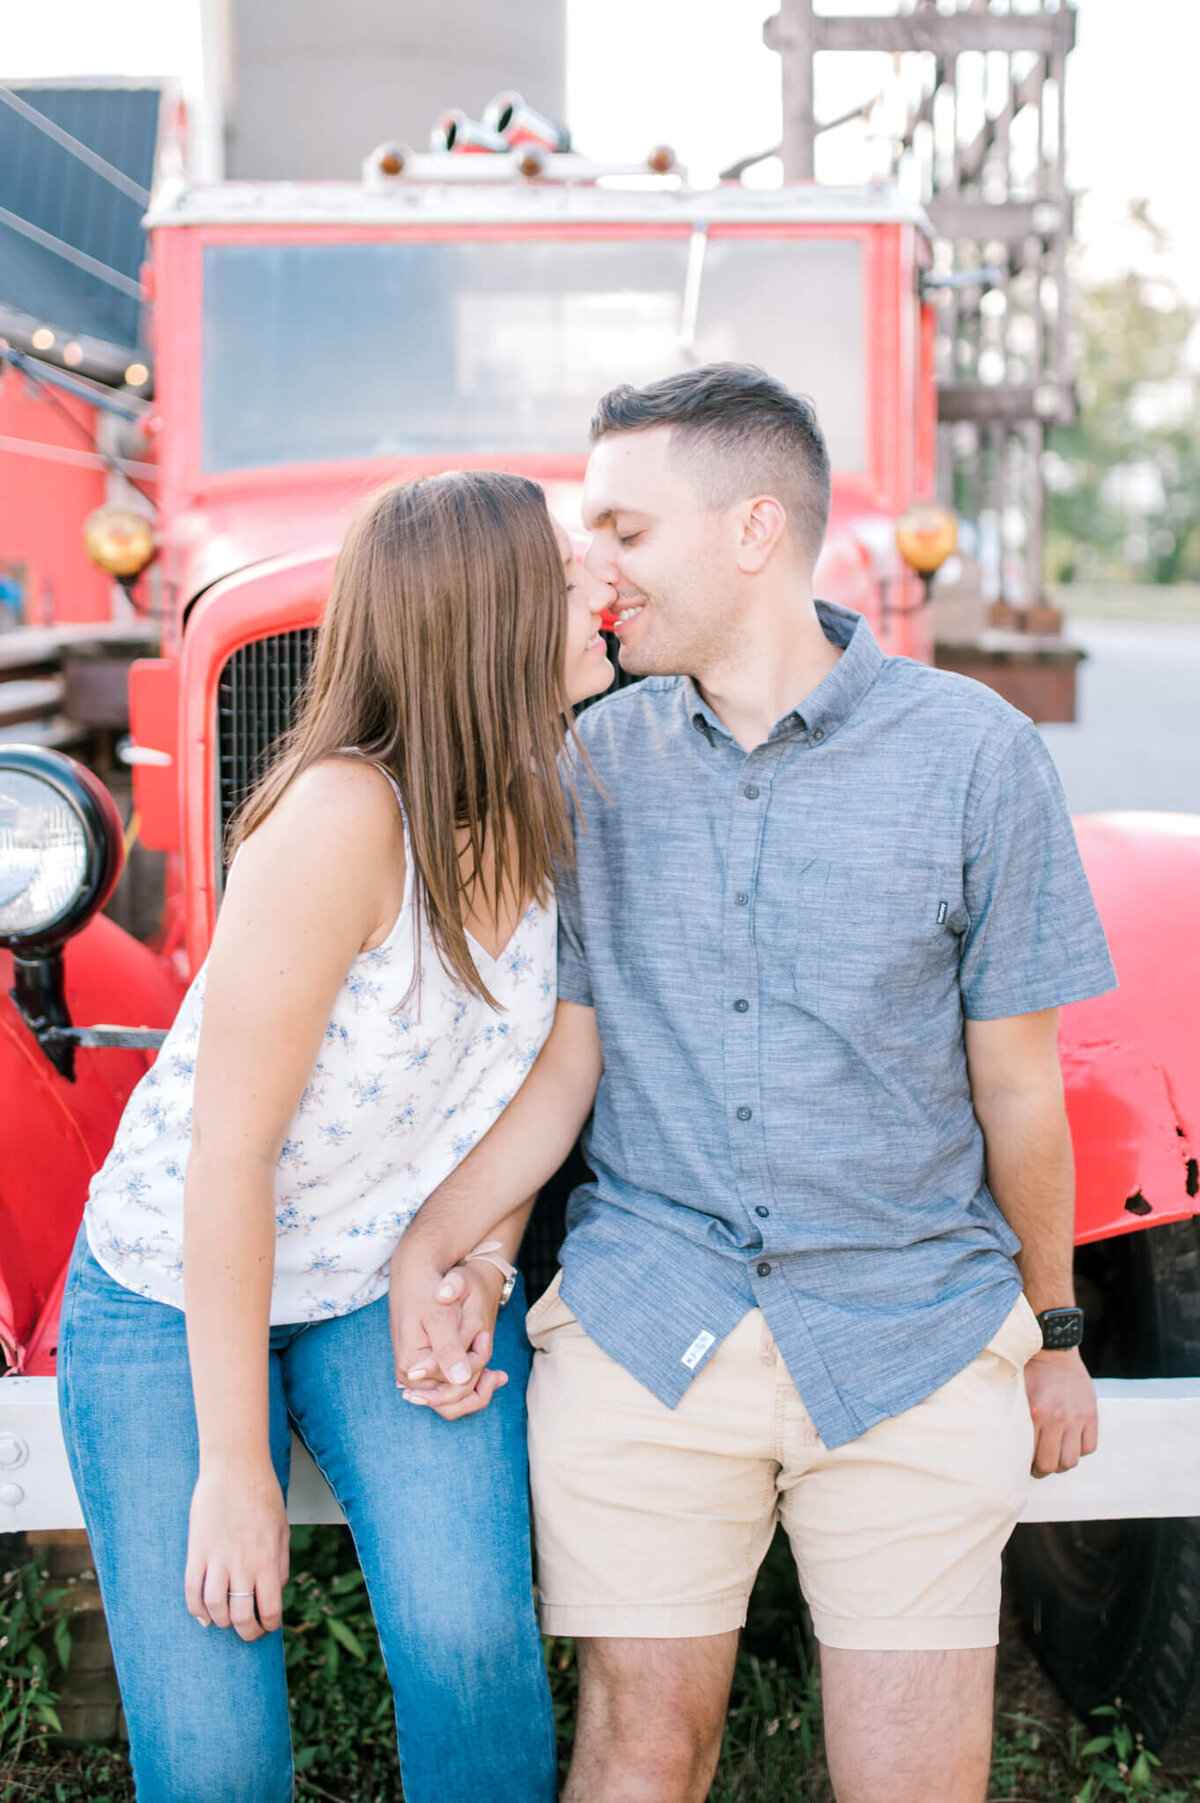 Niagara Wedding Photography. Engaged couple kissing while sitting at bumper of vintage fire truck